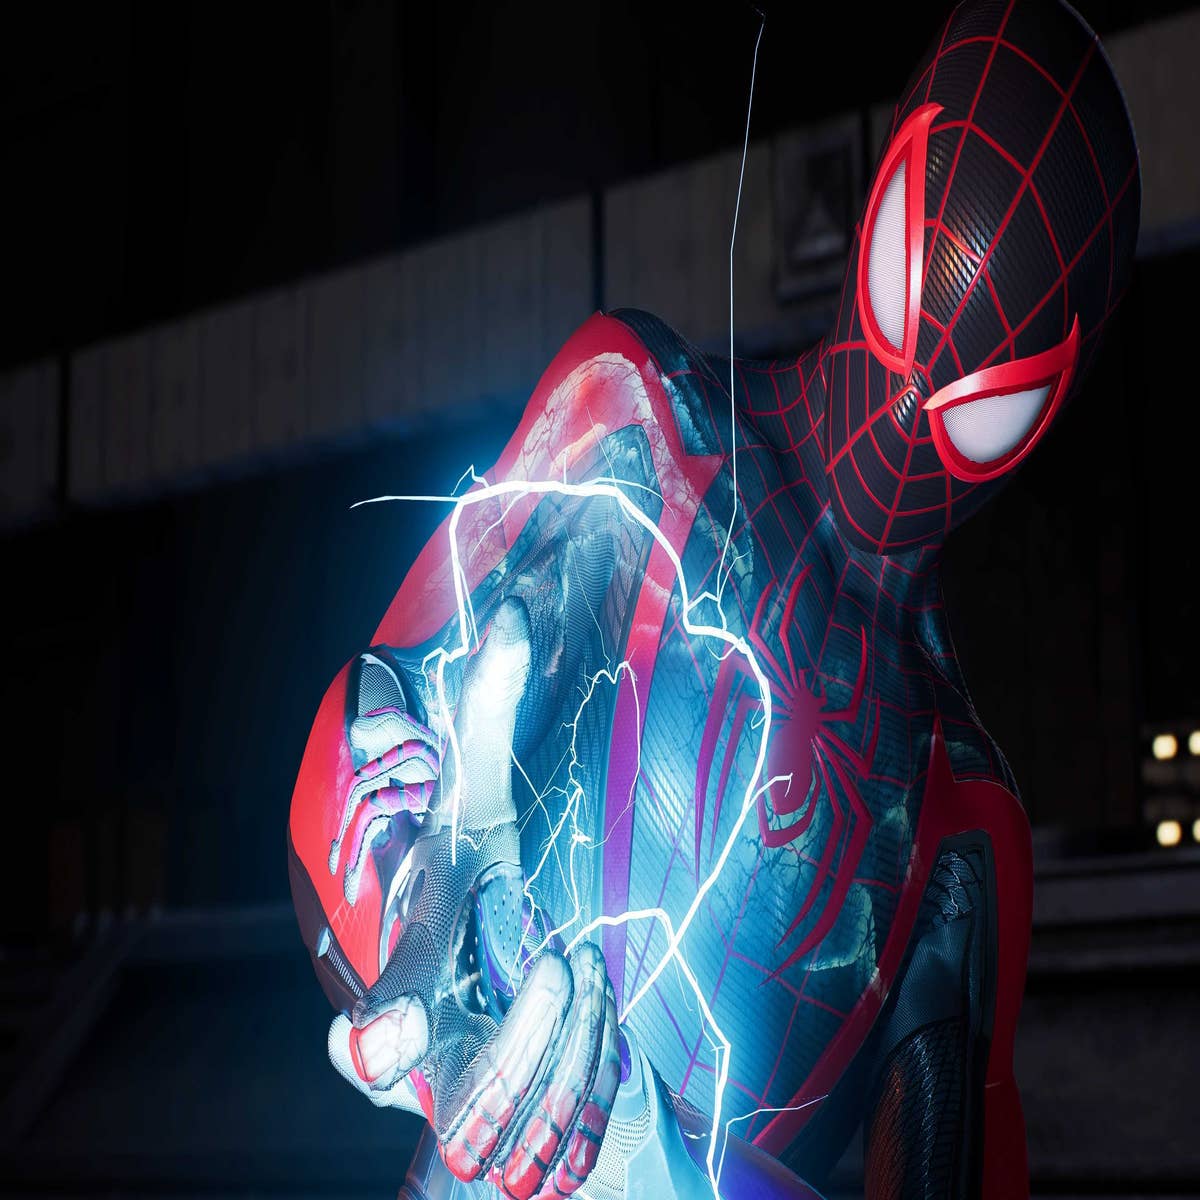 Miles Morales Being Insomniac's New Main Spider-Man Is Not News